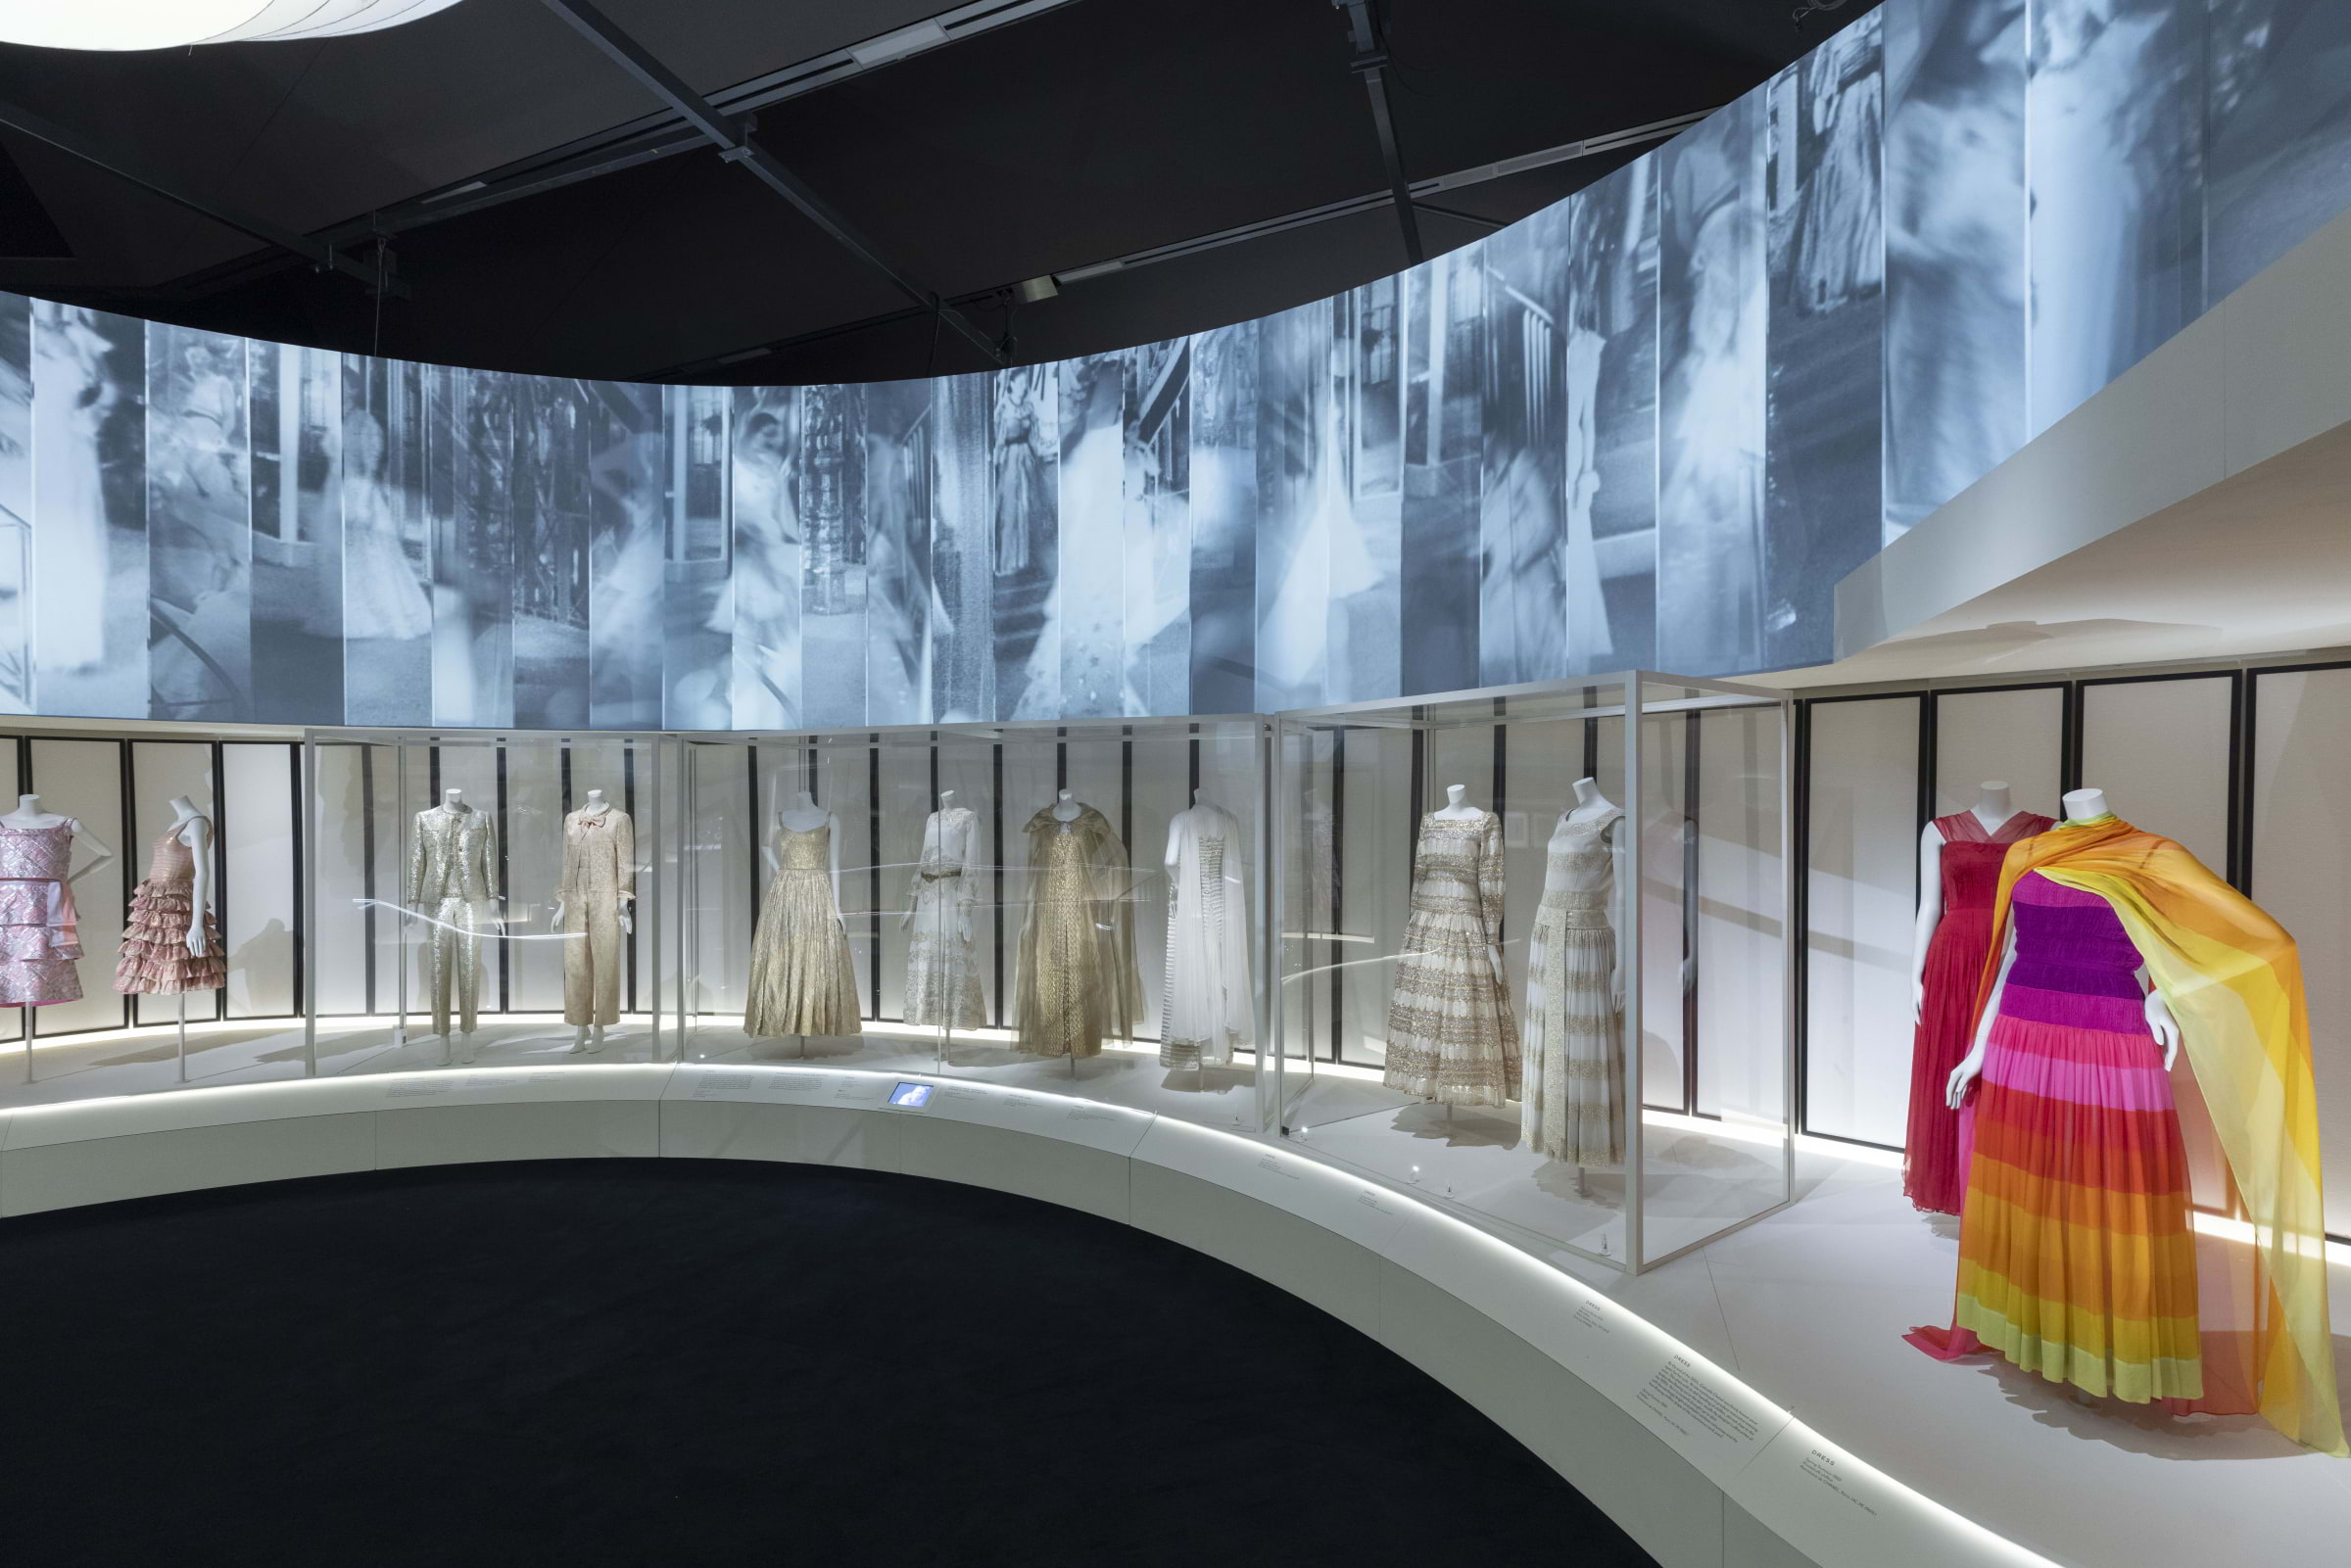 Coco Chanel's influential fashion on display at London exhibition